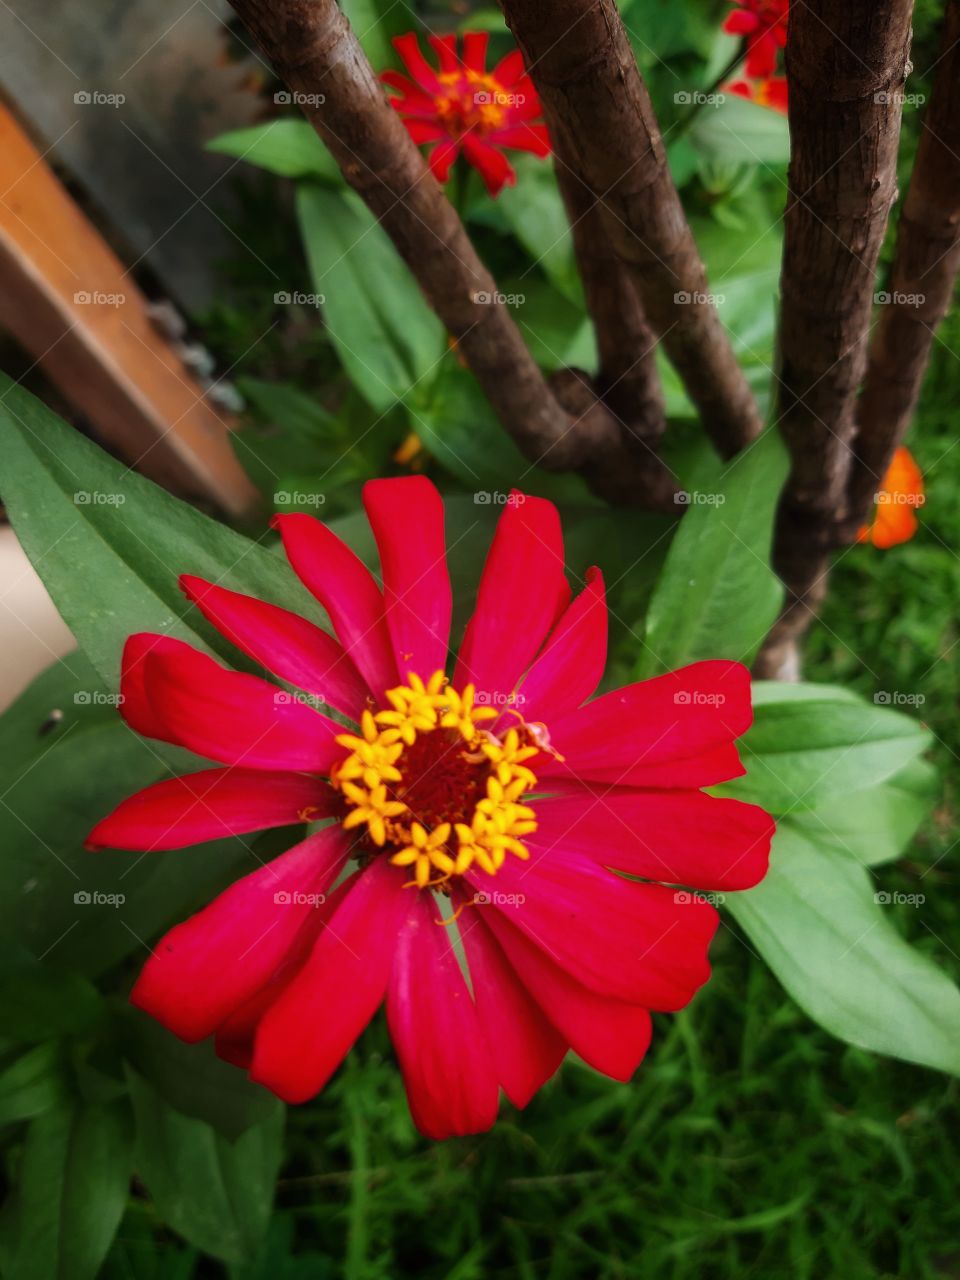 A red blooming flower that can be interpreted that life must go on even though we are in a difficult situation like this pandemic of Covid - 19.